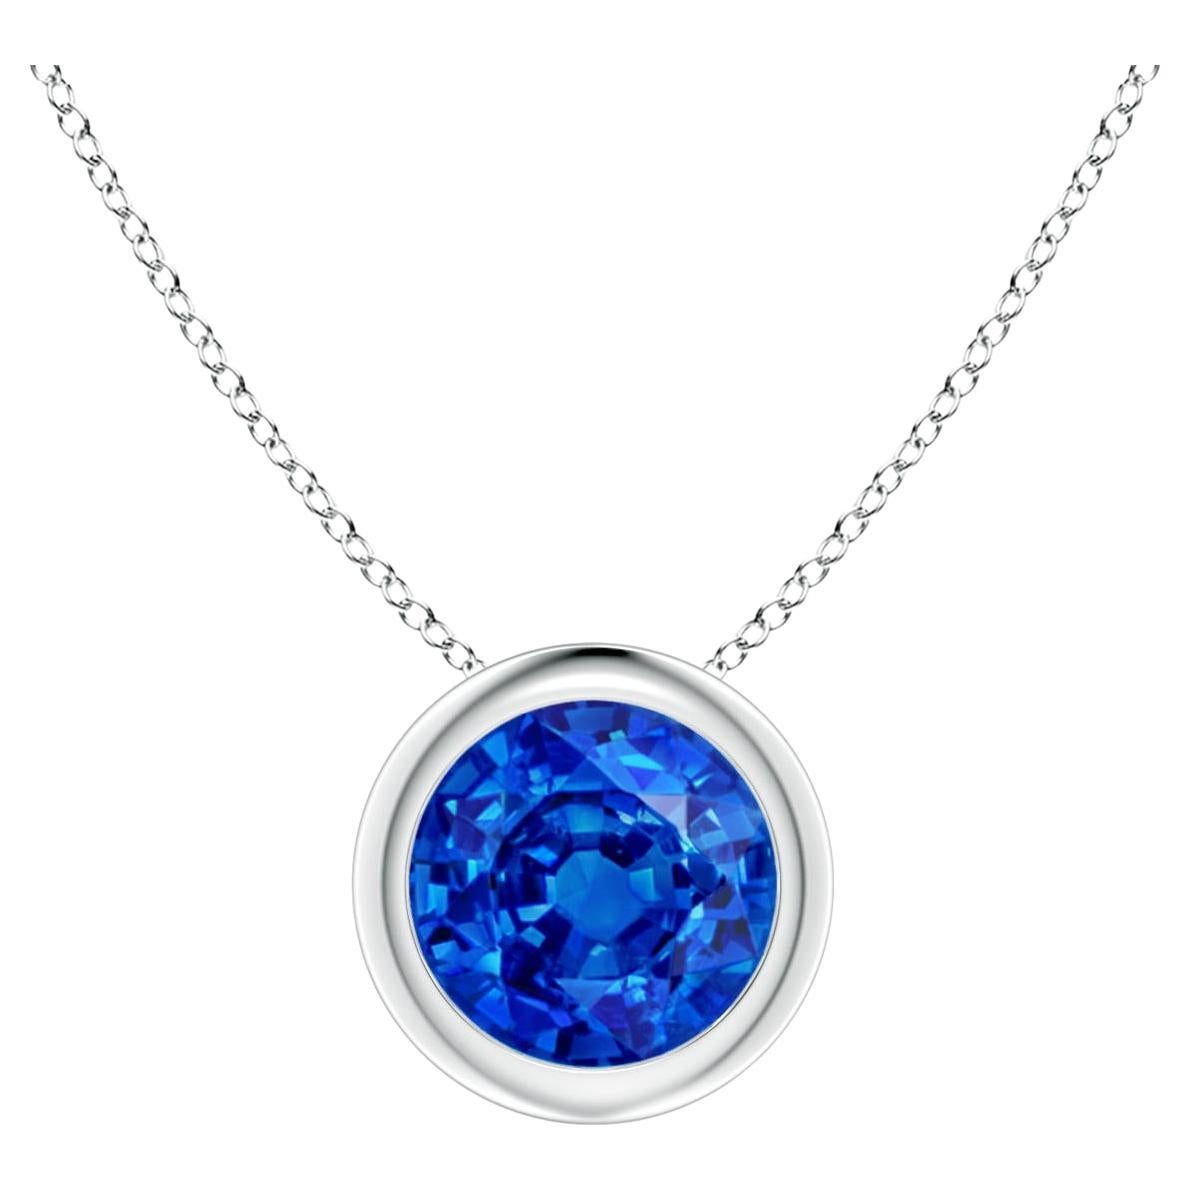 Natural Round 1 ct Blue Sapphire Solitaire 6mm Pendant in 14K White Gold